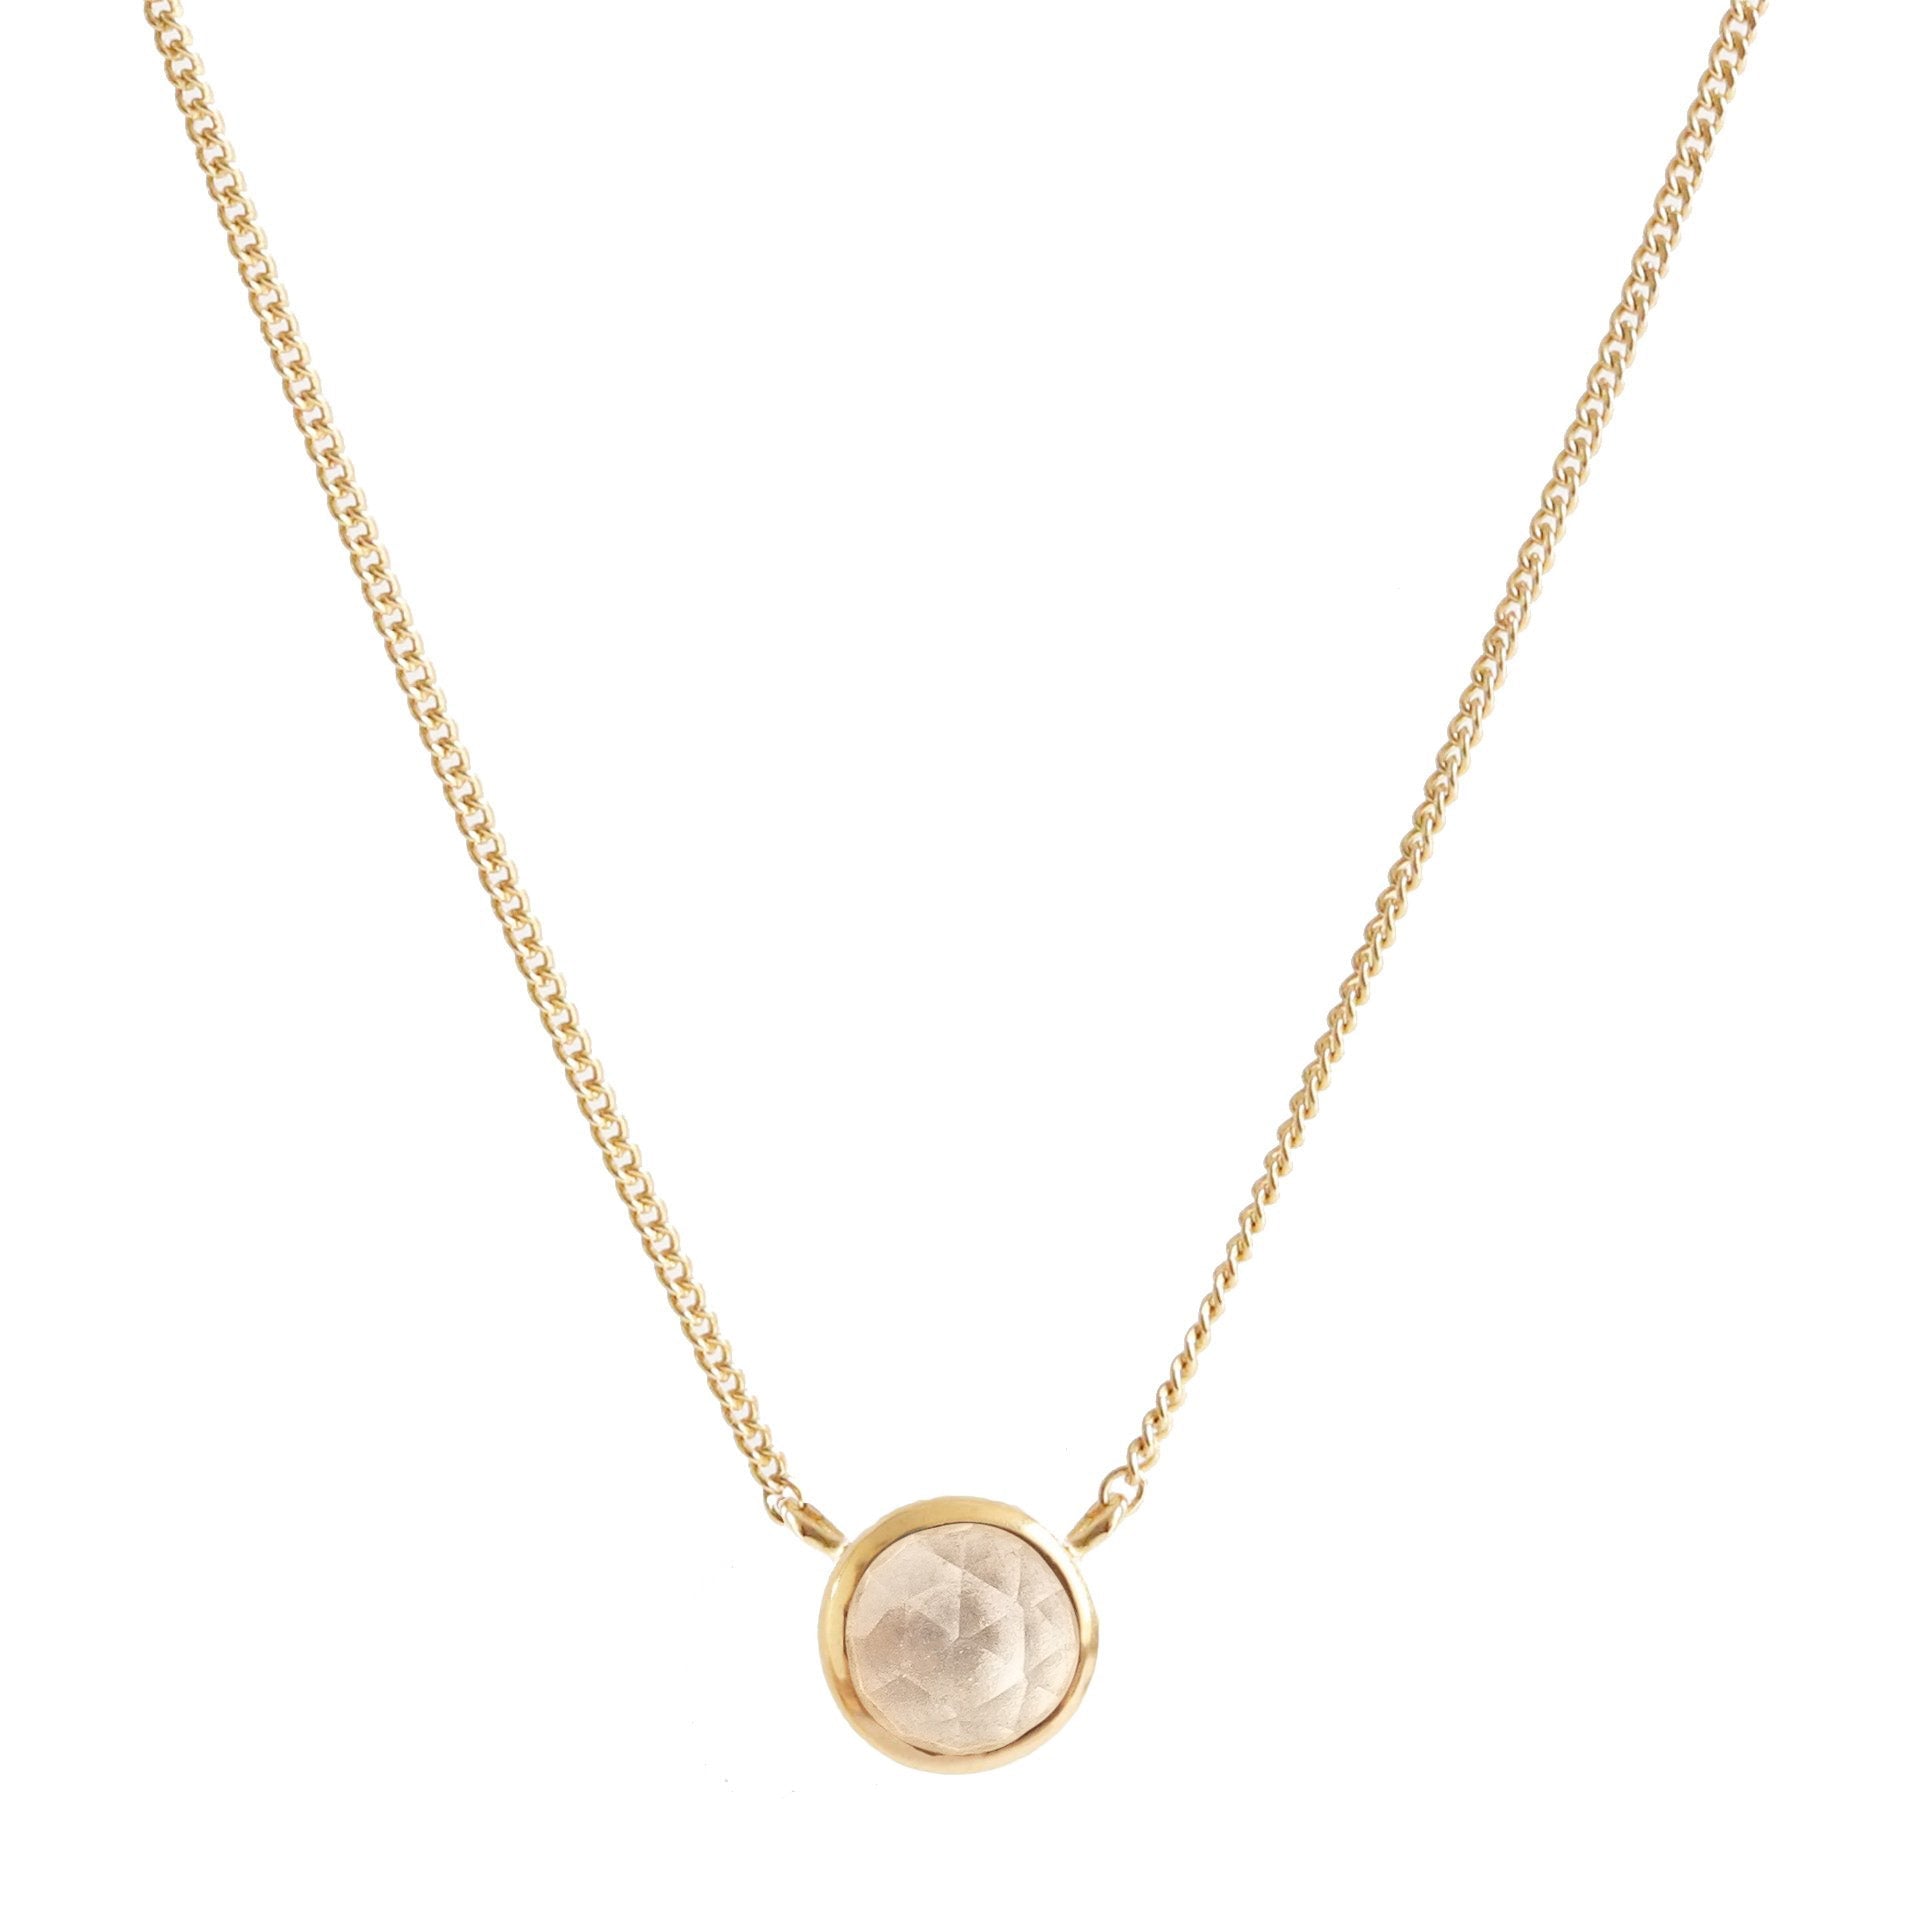 DAINTY LEGACY NECKLACE - WHITE TOPAZ & GOLD - SO PRETTY CARA COTTER